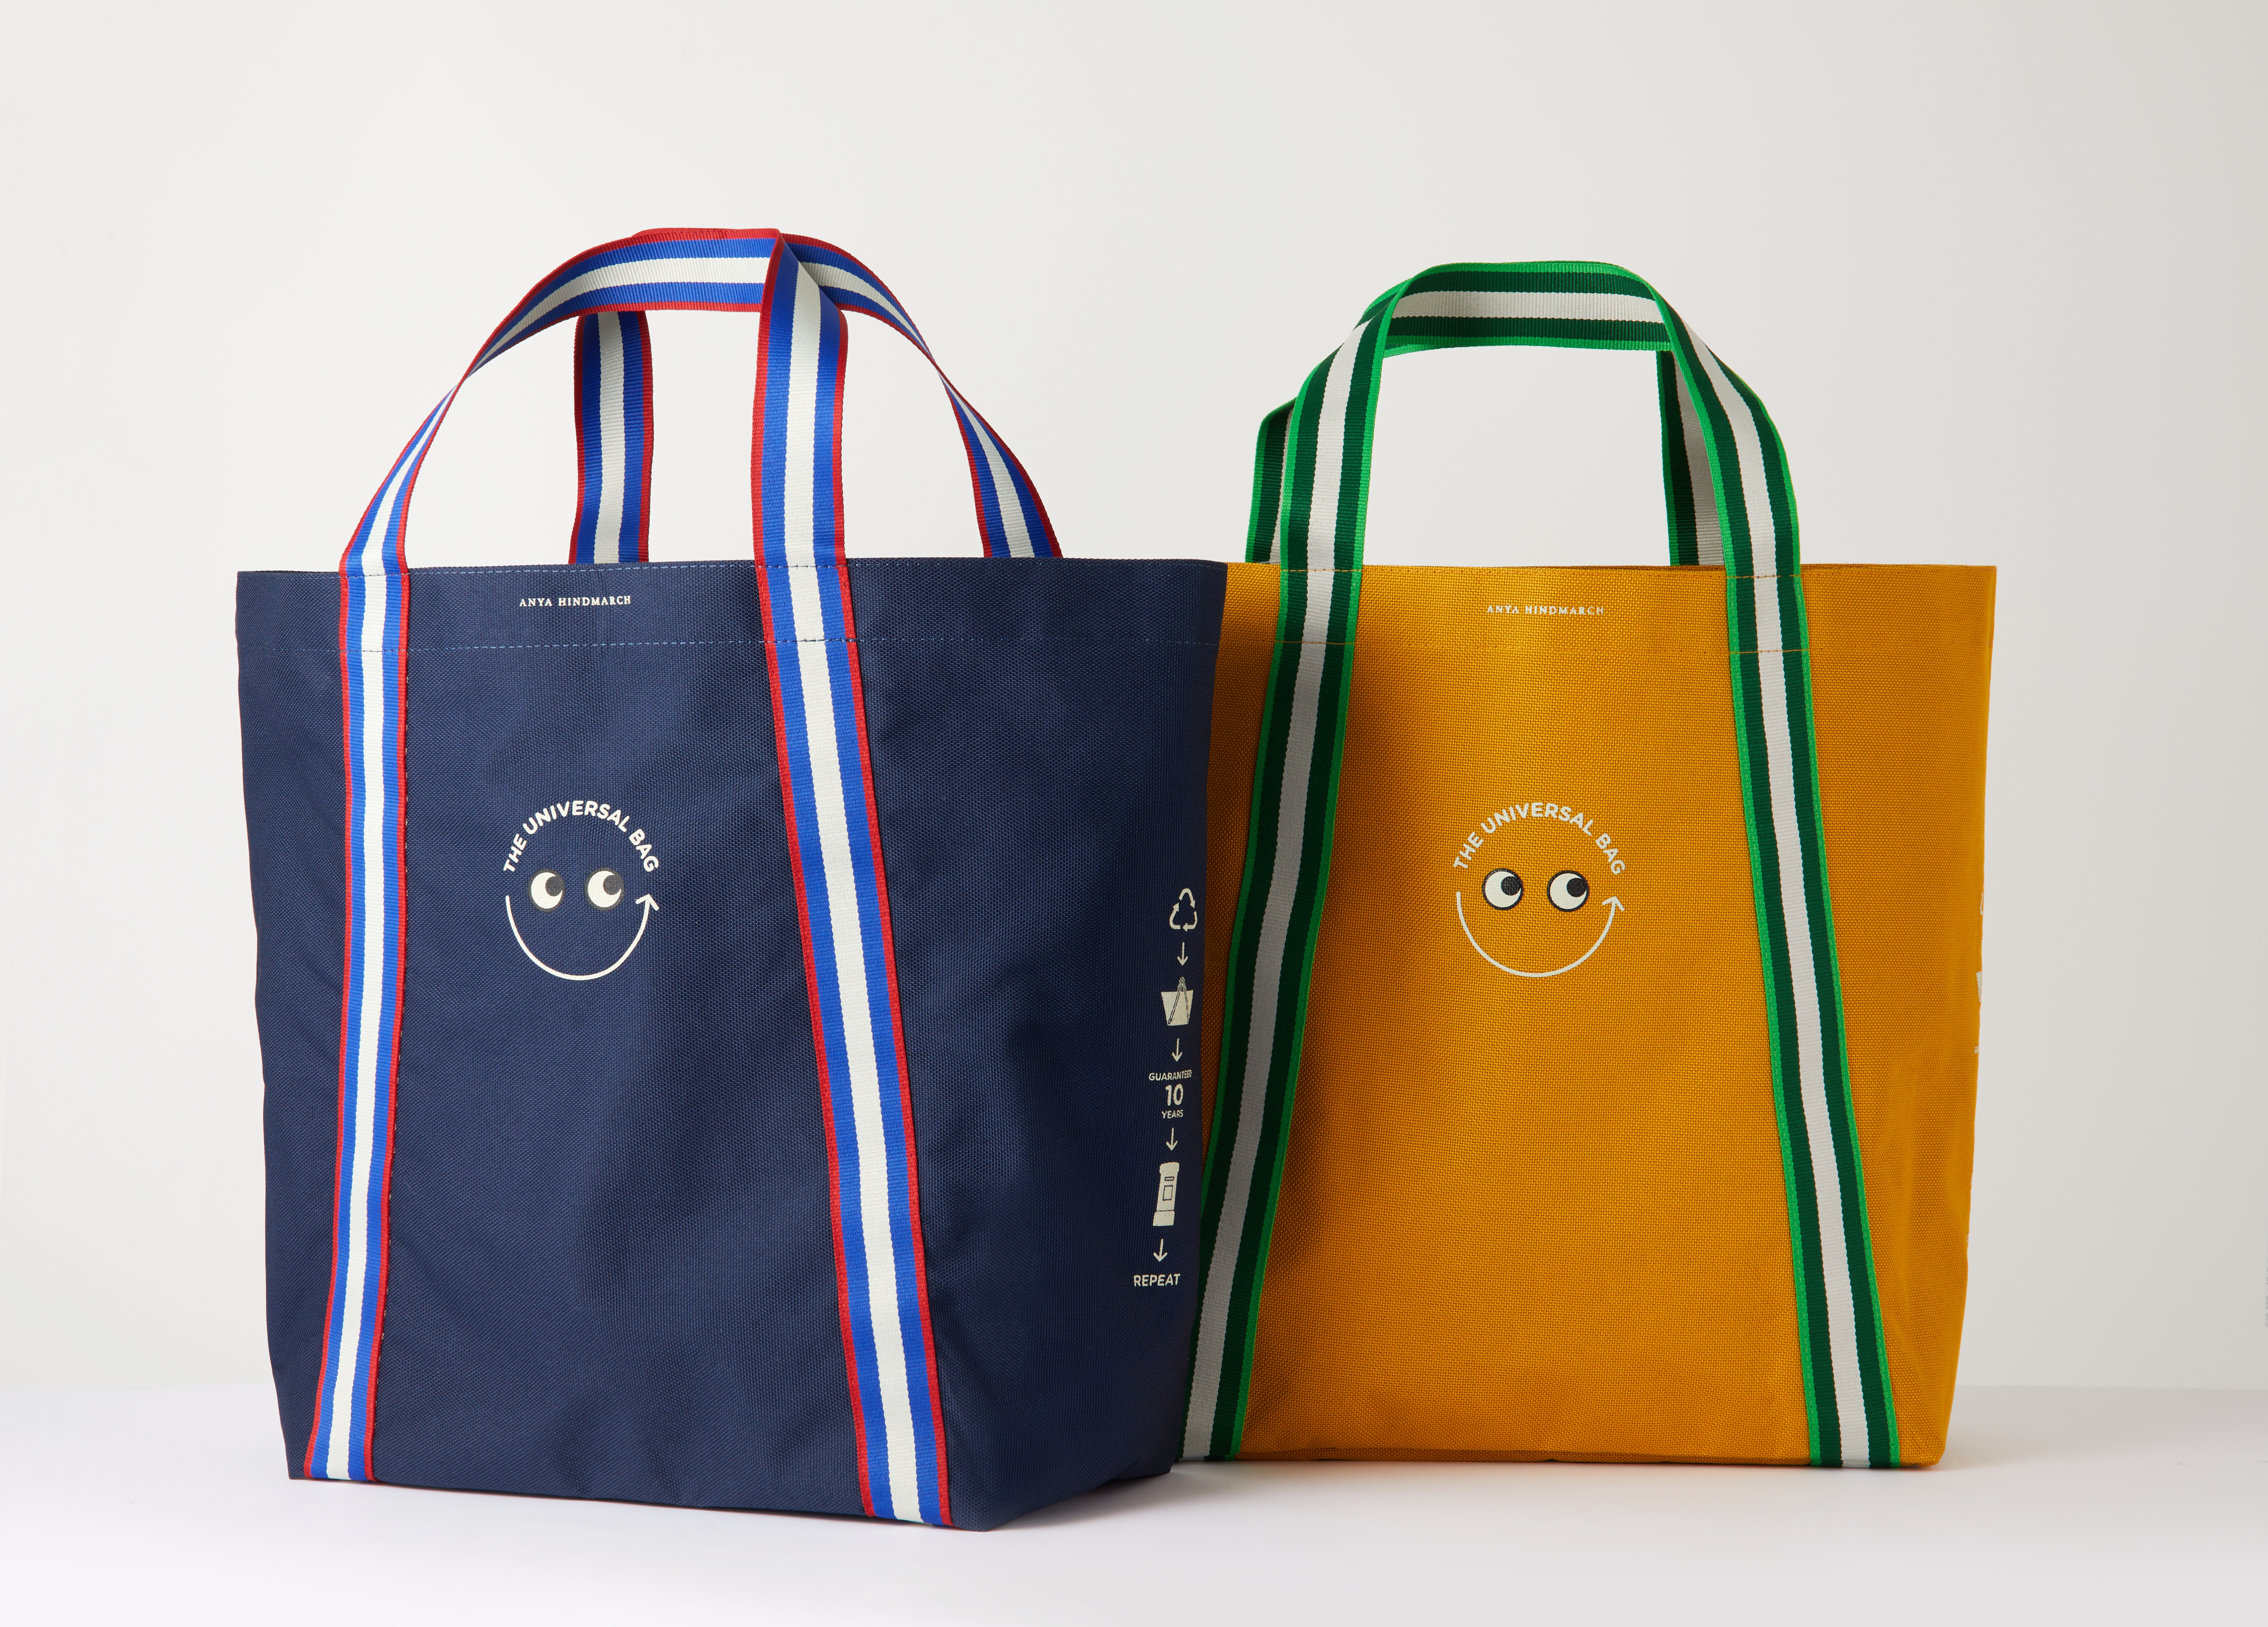 Anya Hindmarch to launch the Universal Bag in collaboration with Morrisons